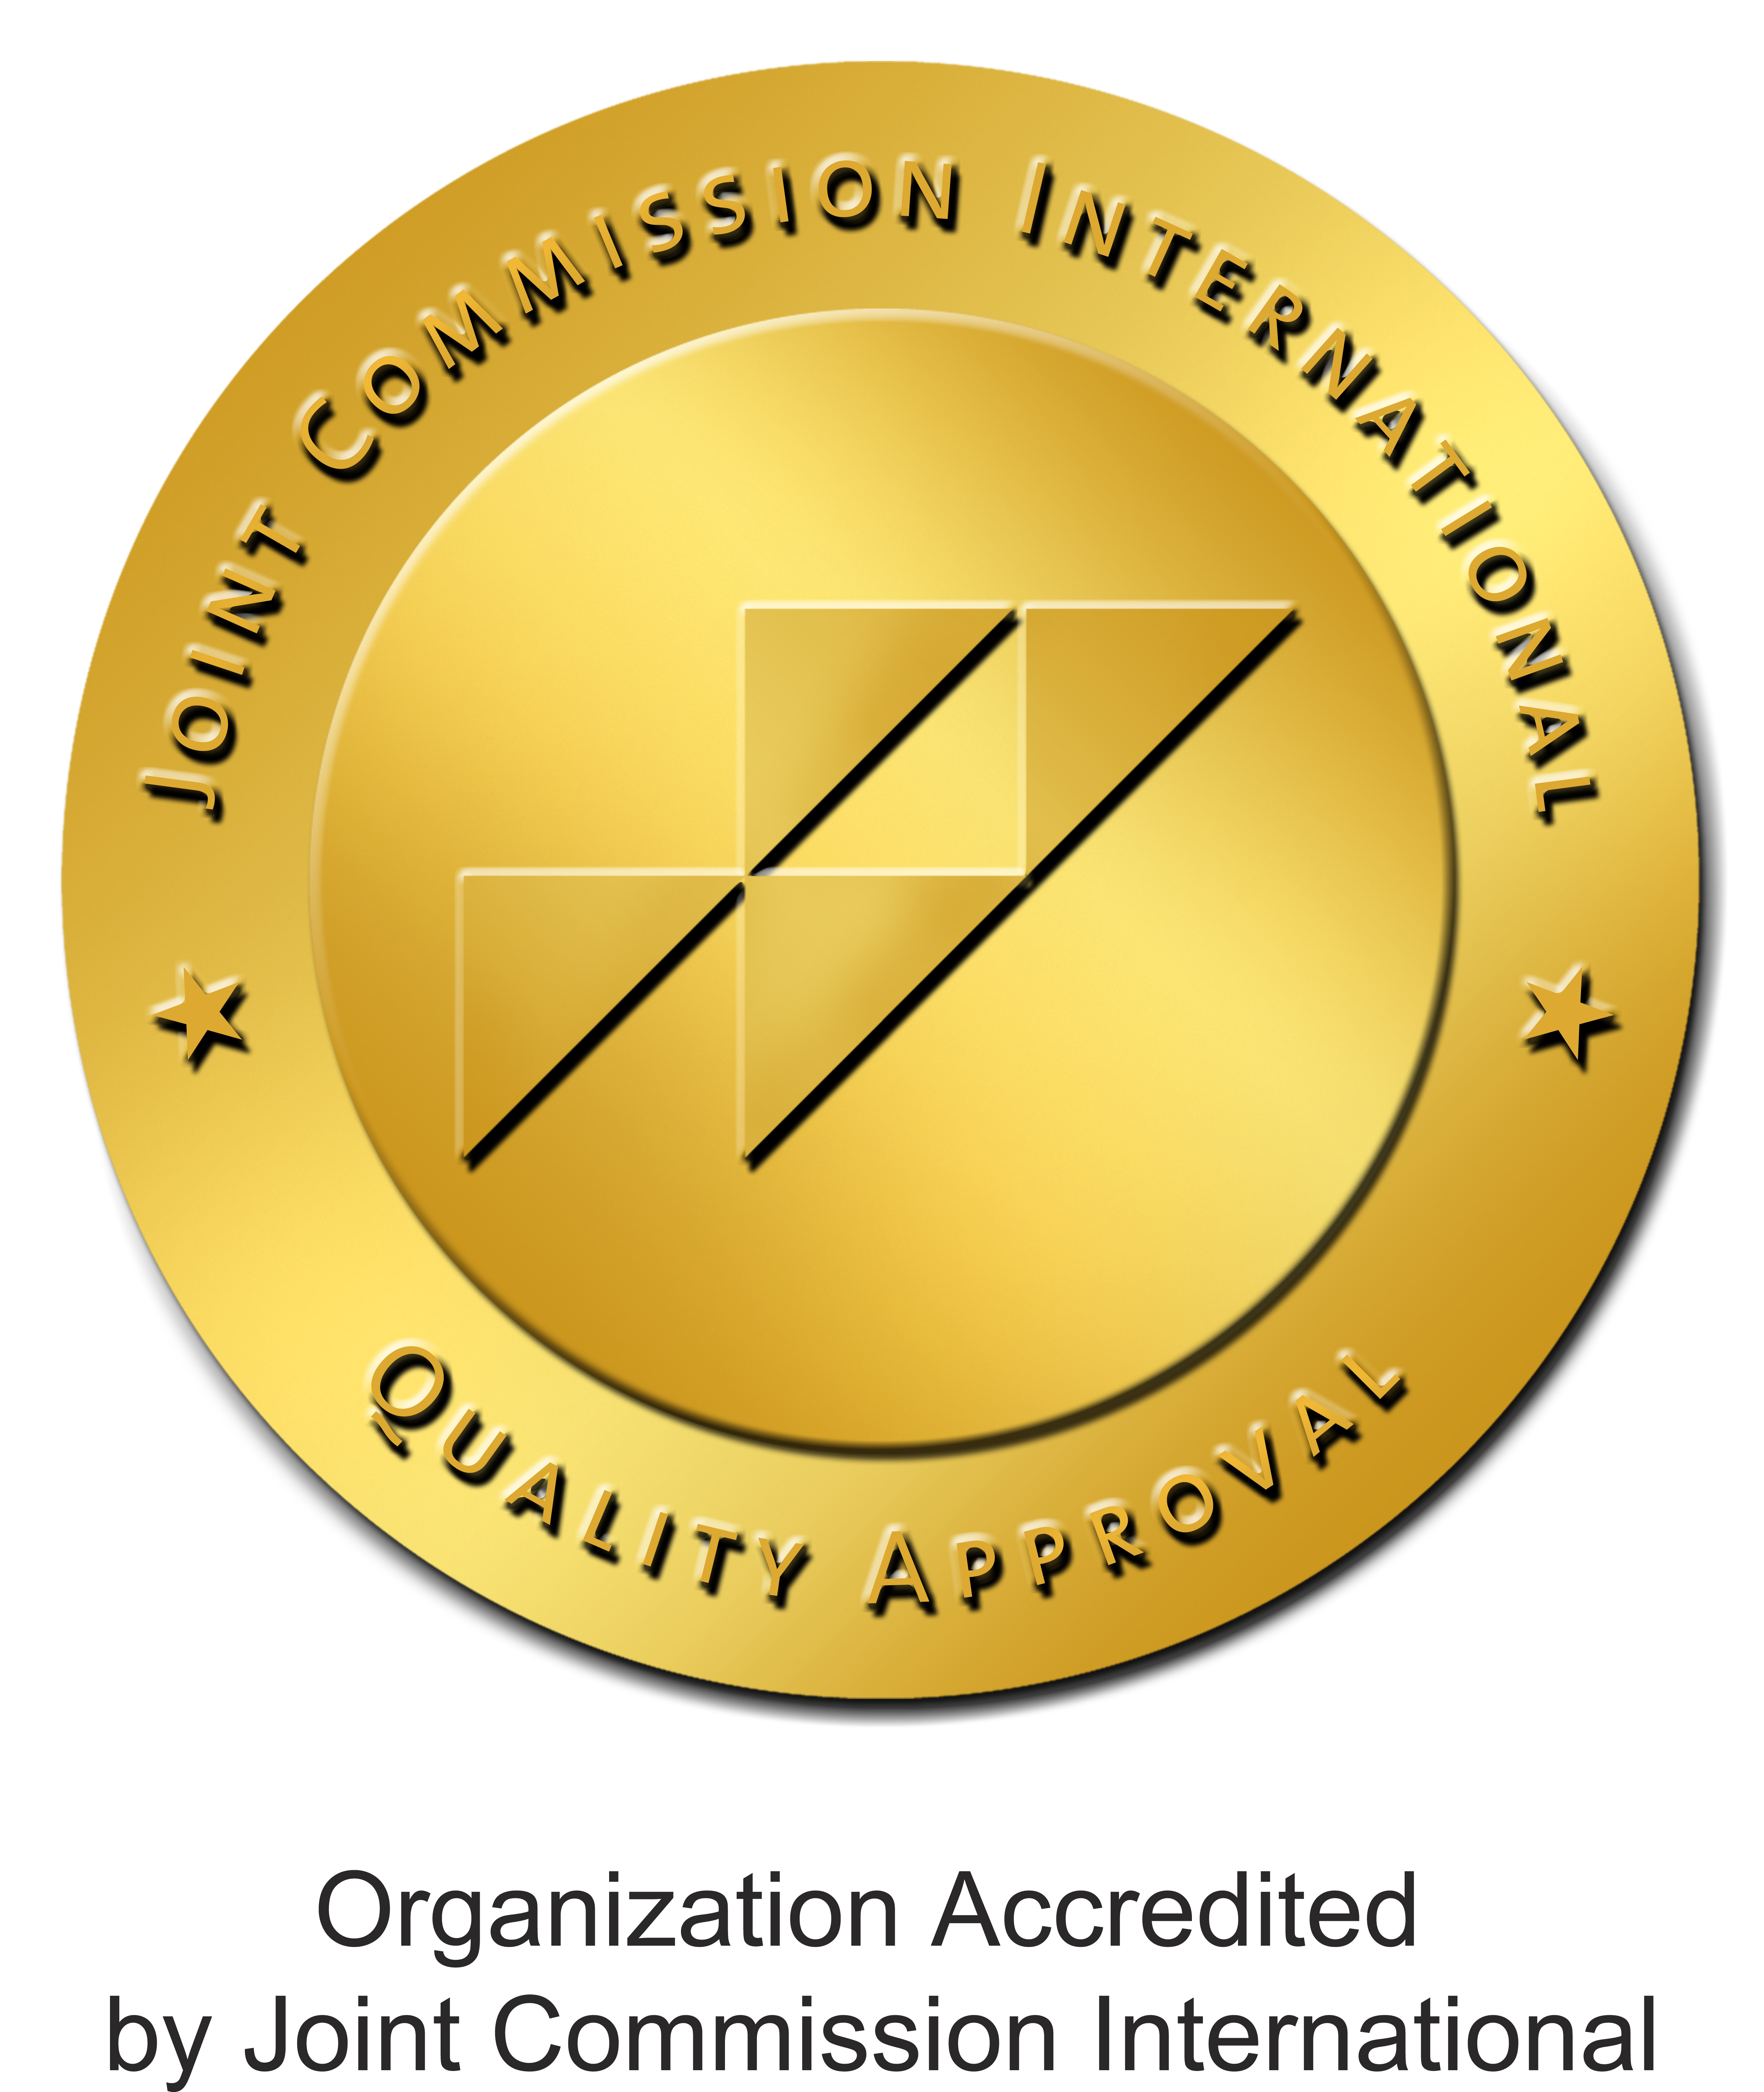 Organization Accredited by Joint commision internatoional